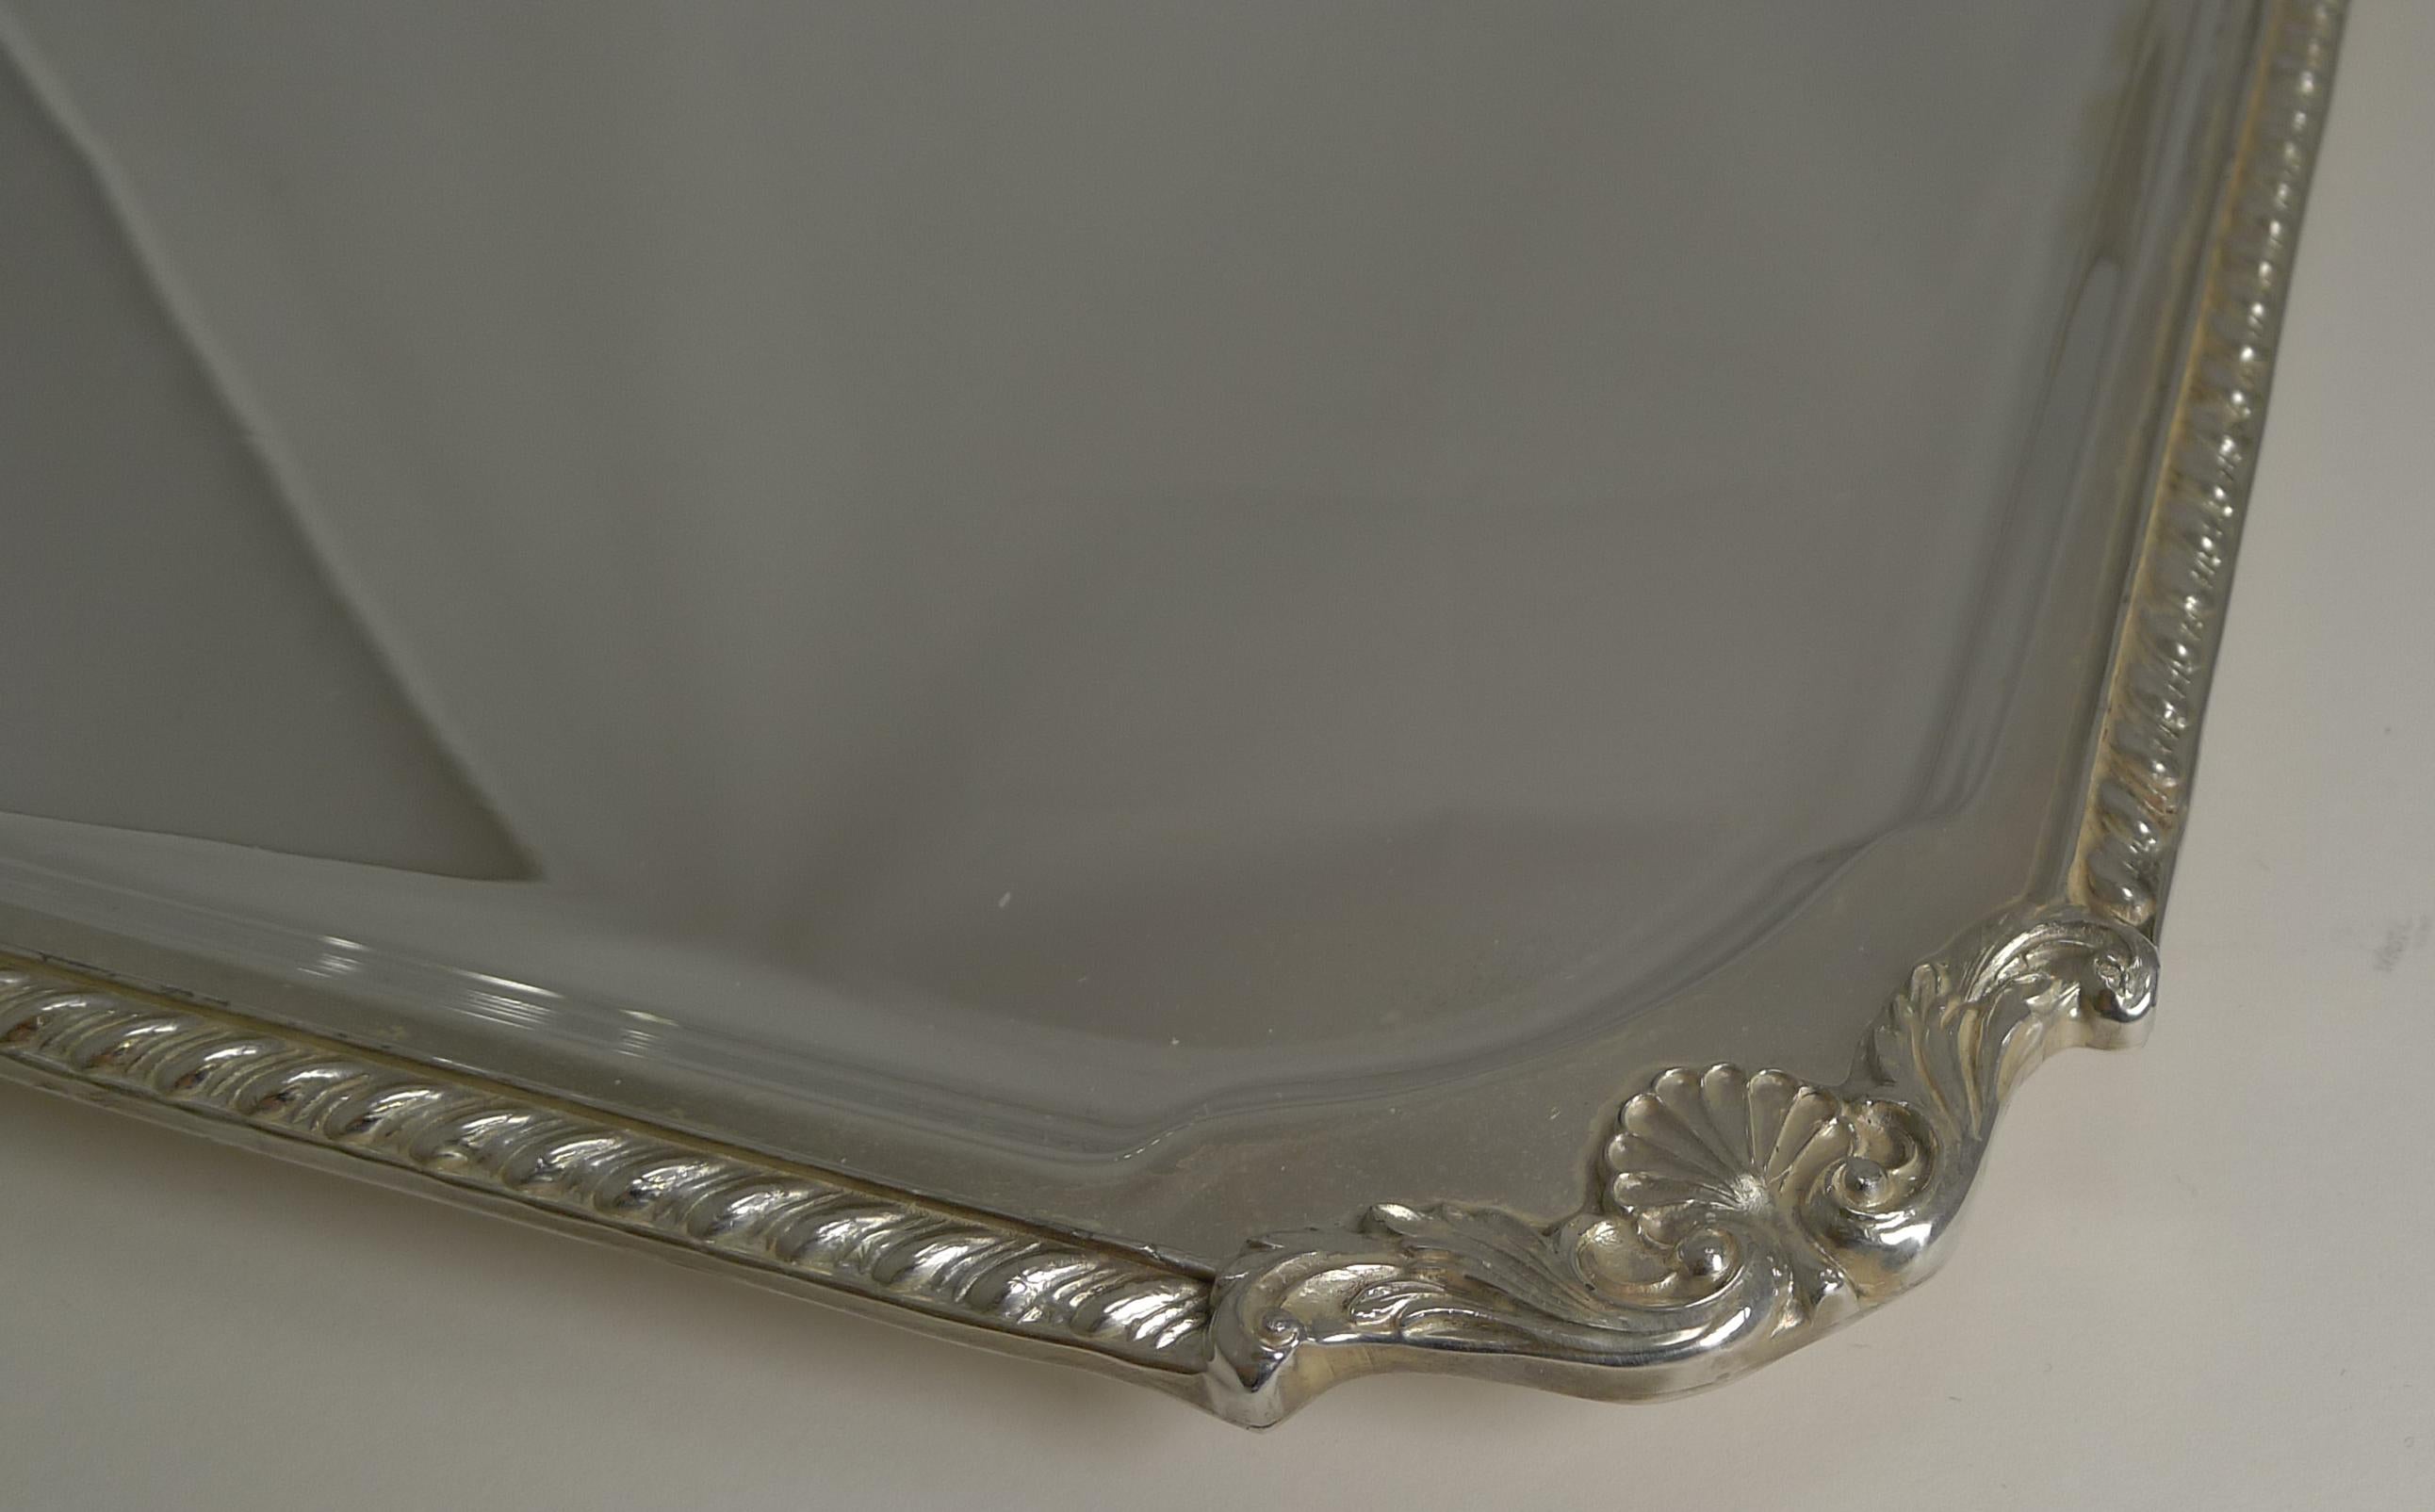 Edwardian Large Antique English Silver Plated Cocktail Tray / Salver by Mappin & Webb